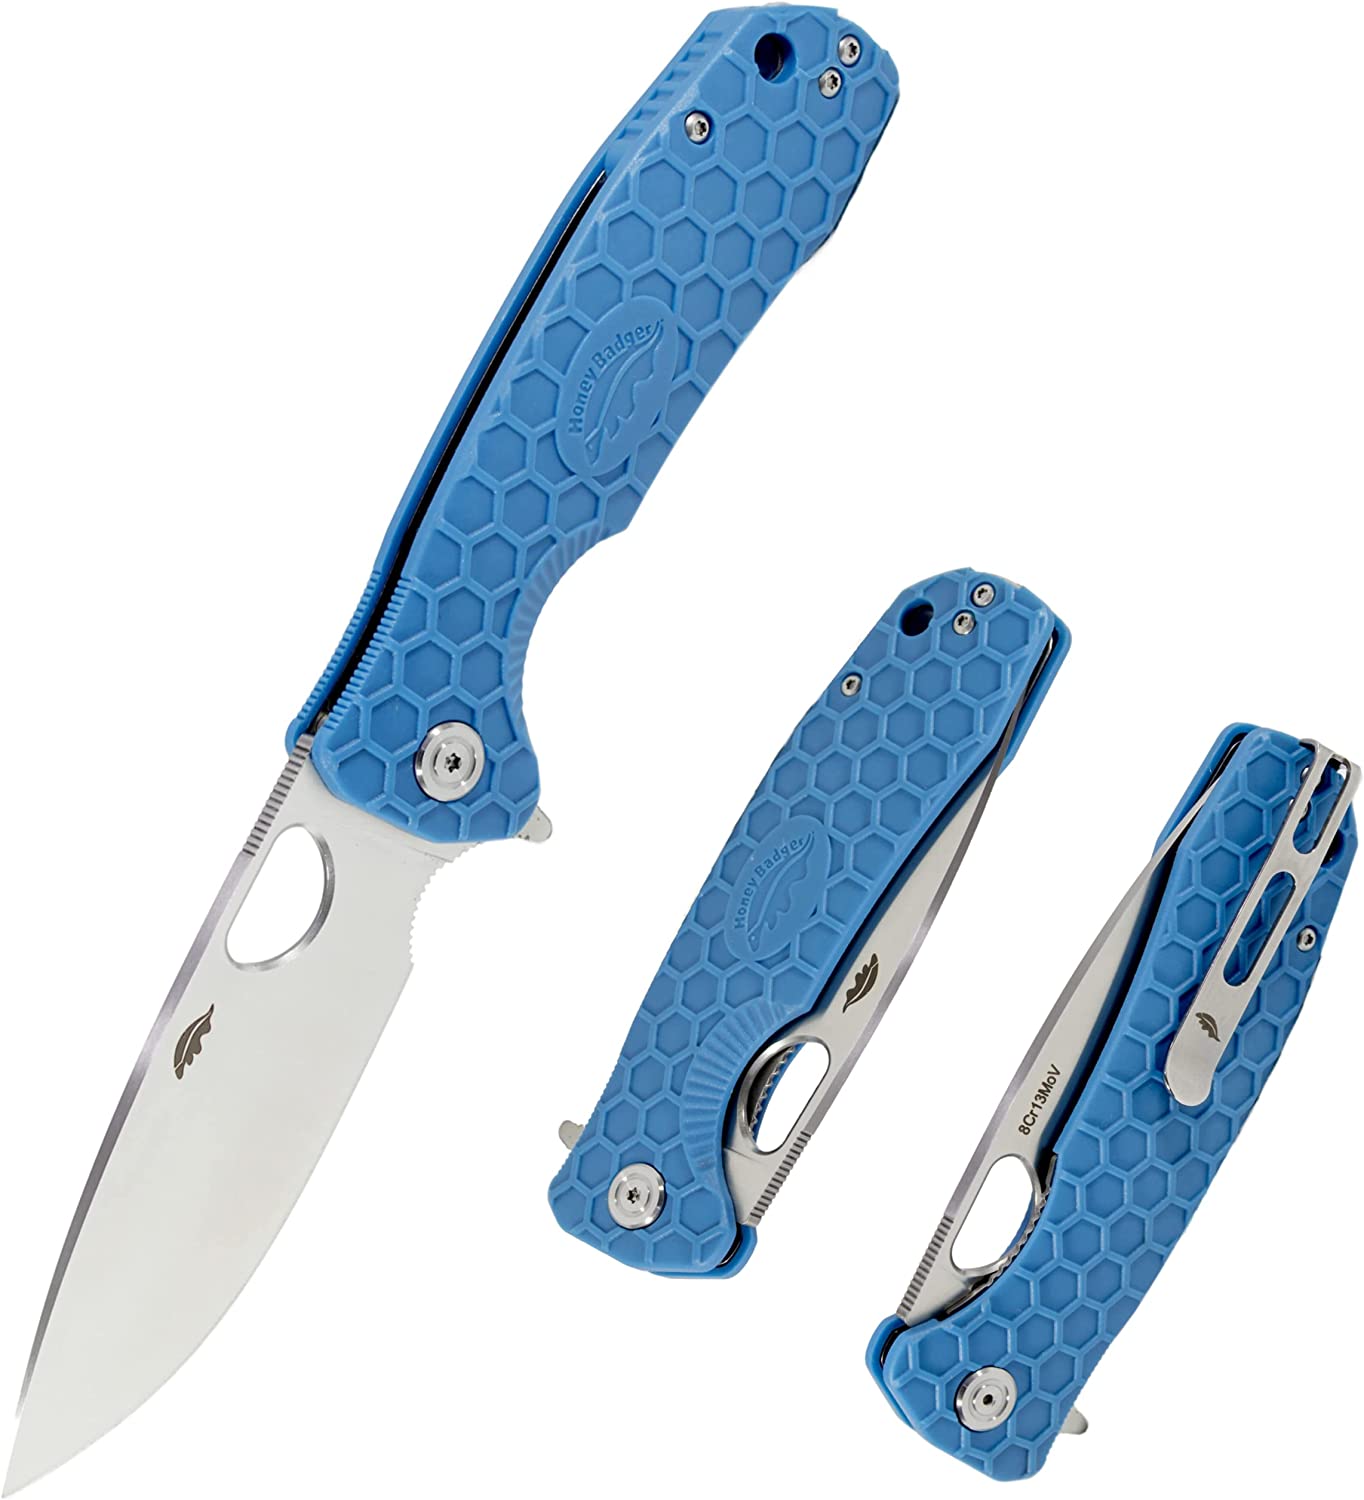 Western Active Honey Badger Small Pocket Knife, EDC Drop Point Folding Utility Knife, Stainless Steel Blade, Deep Carry Reversible Pocket Clip – 2.81", 2.6oz – Drop Point Small